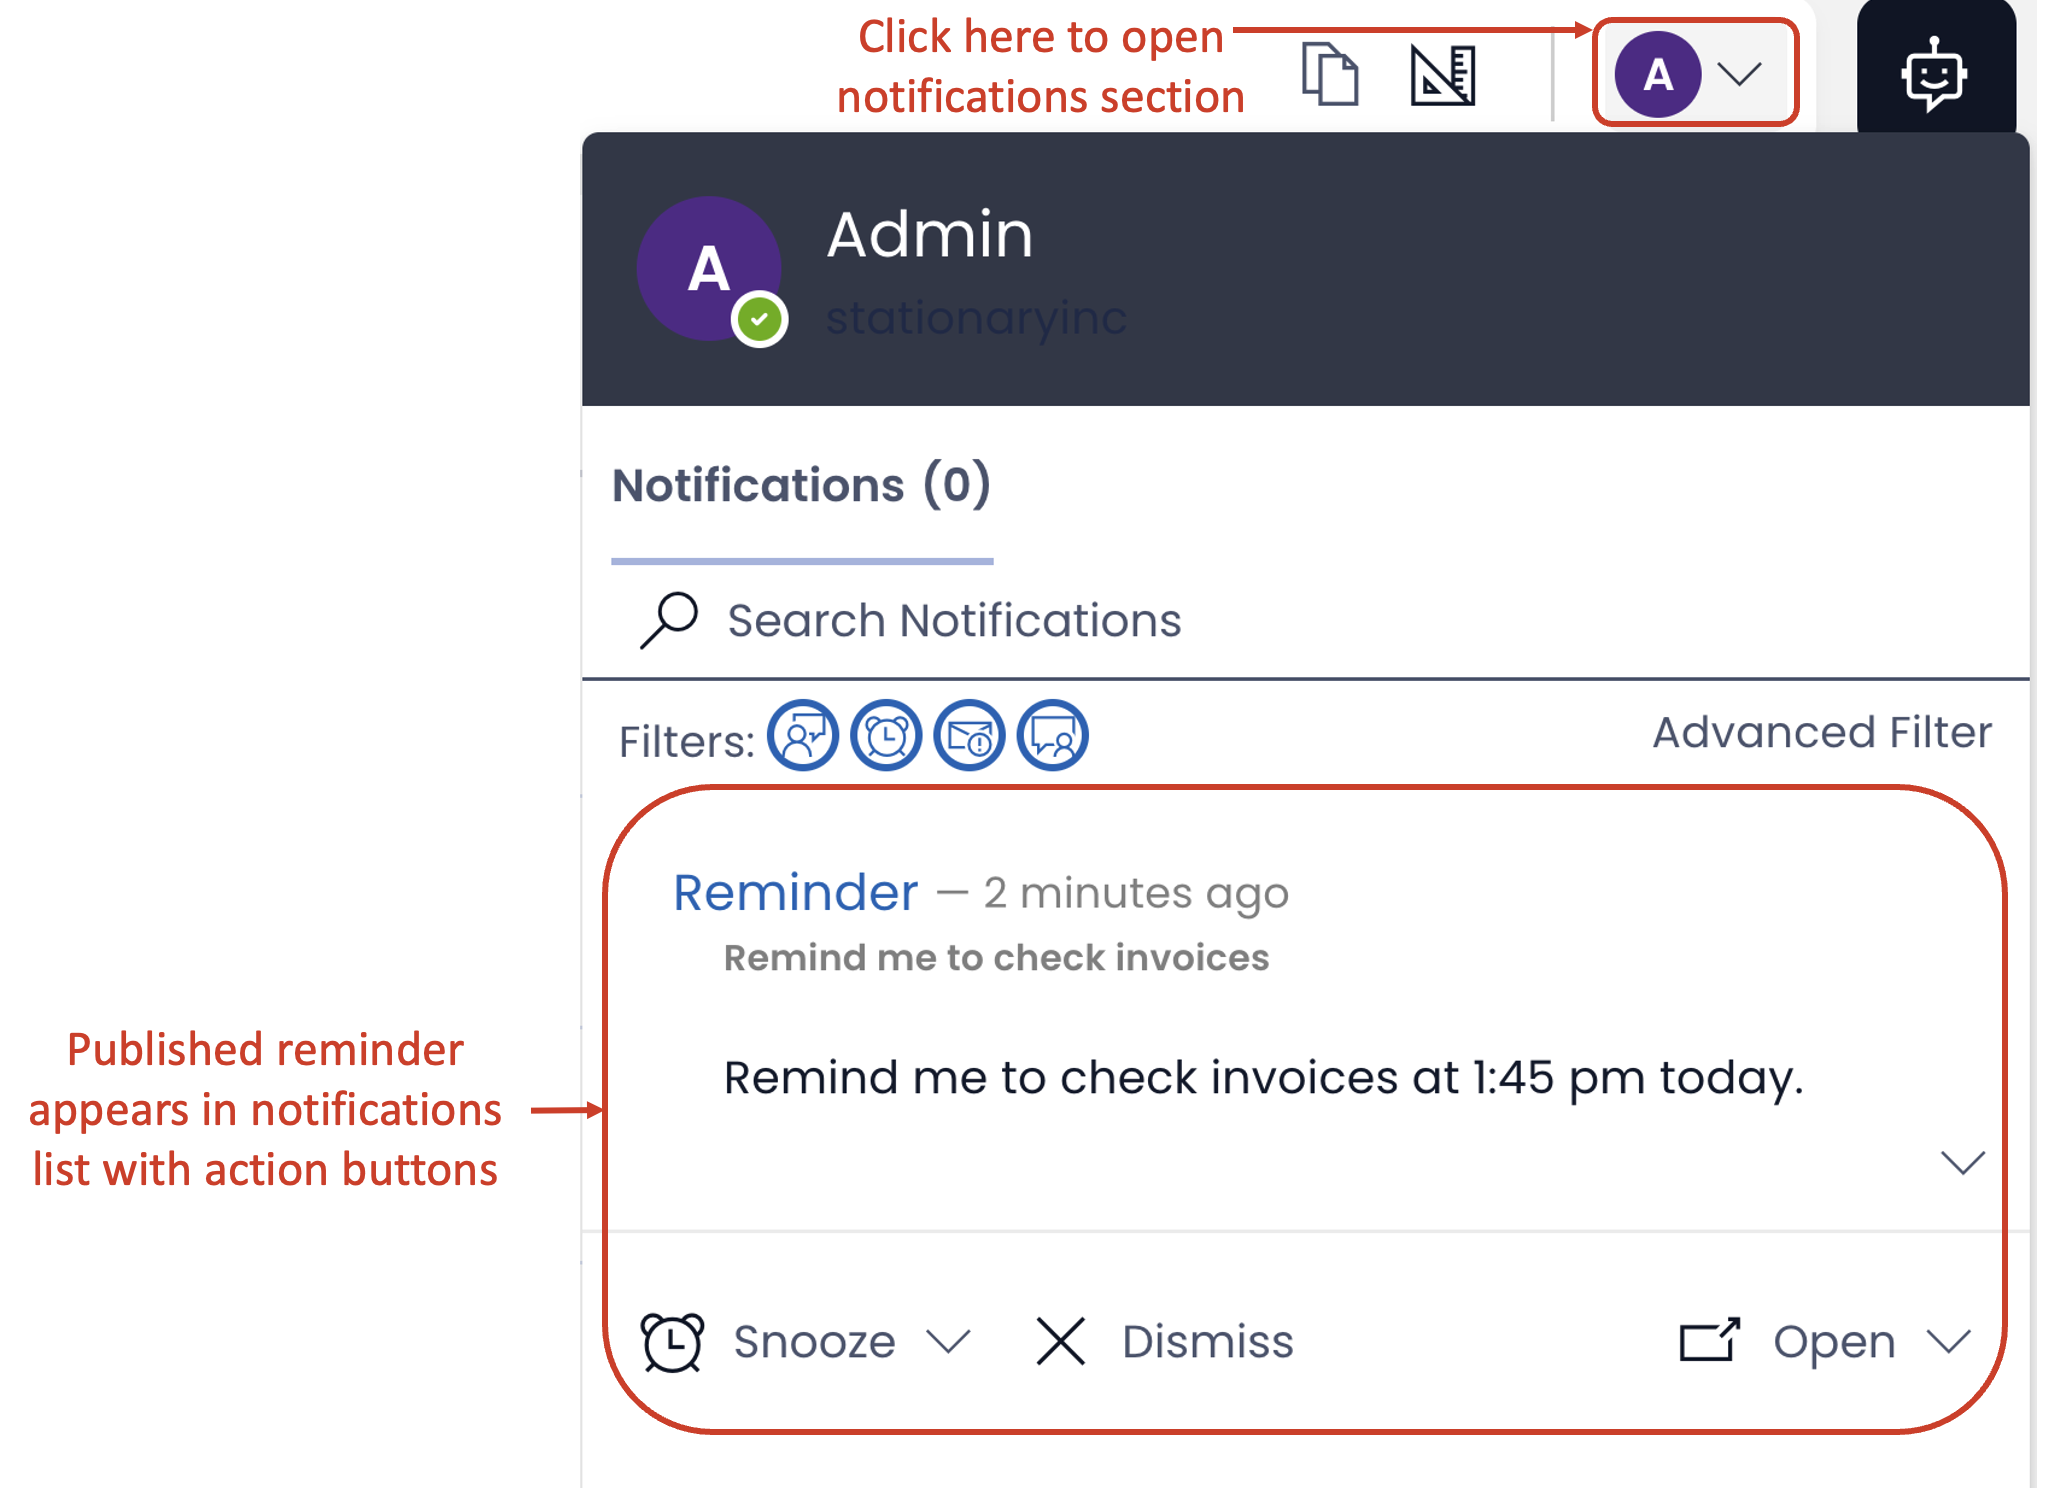 Image showing how to access notifications section for reminders